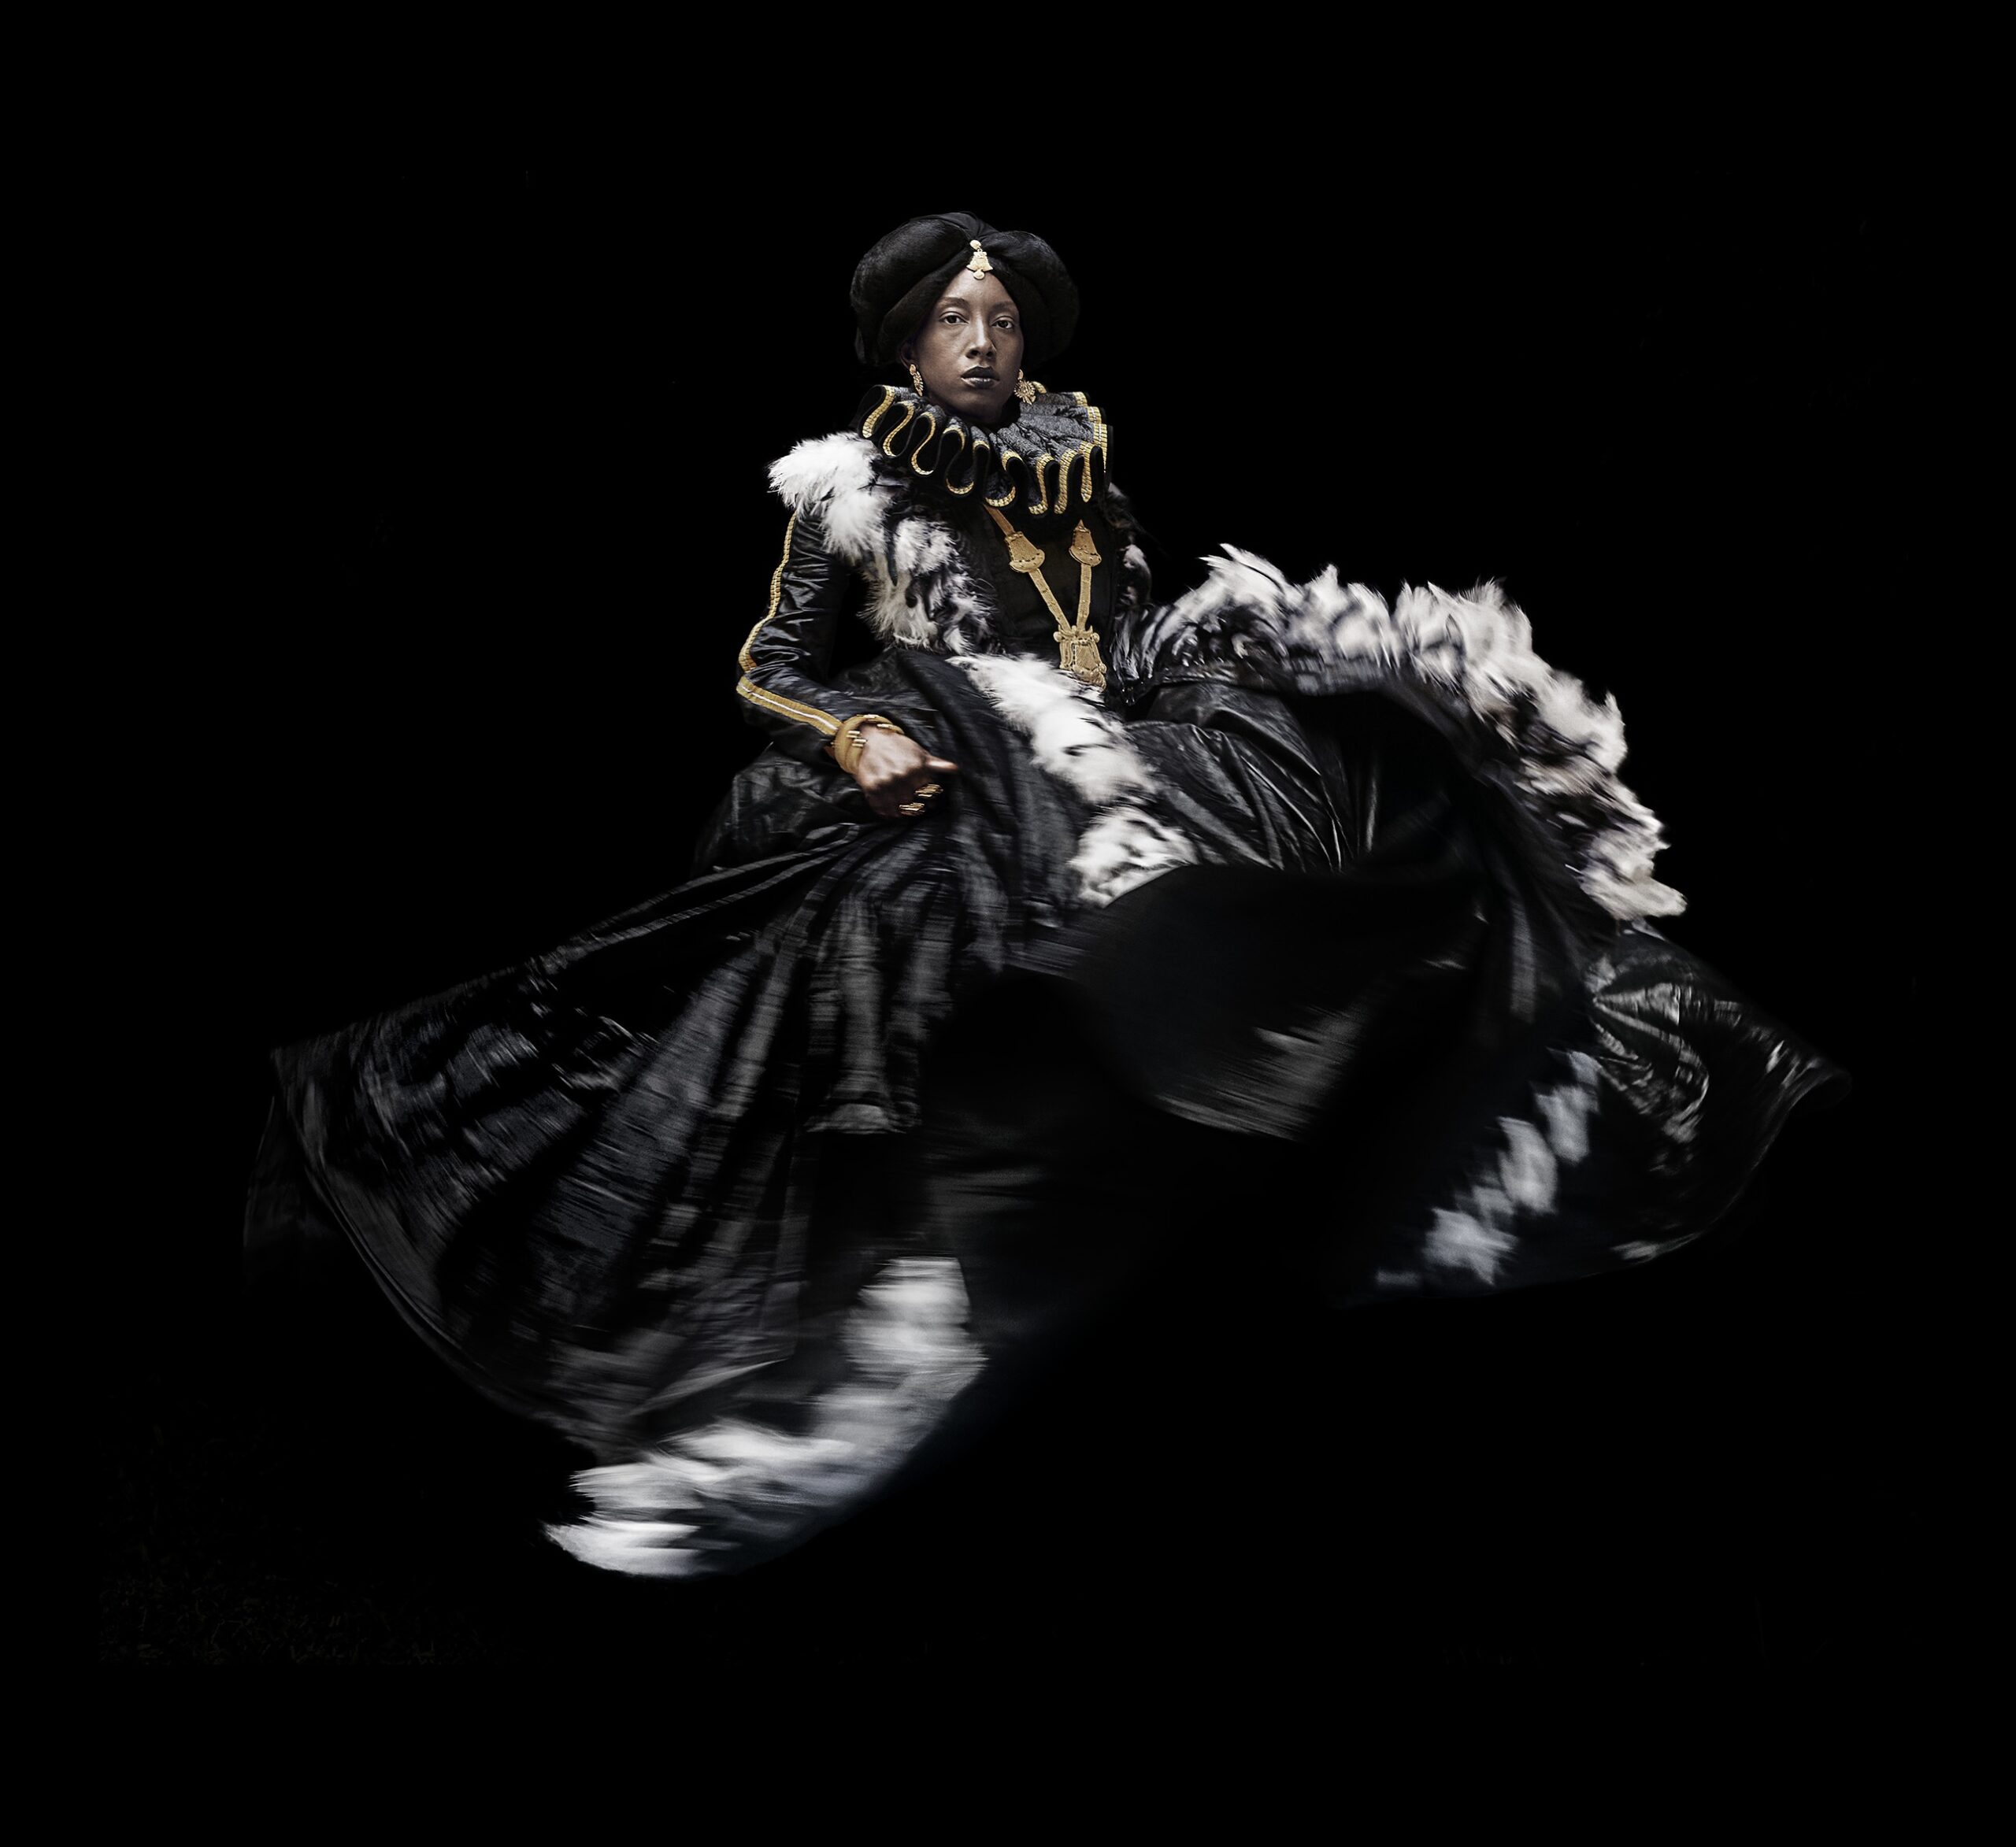 Portrait of dark skinned person in elaborate victorian-like dress moving feather-trim skirt.